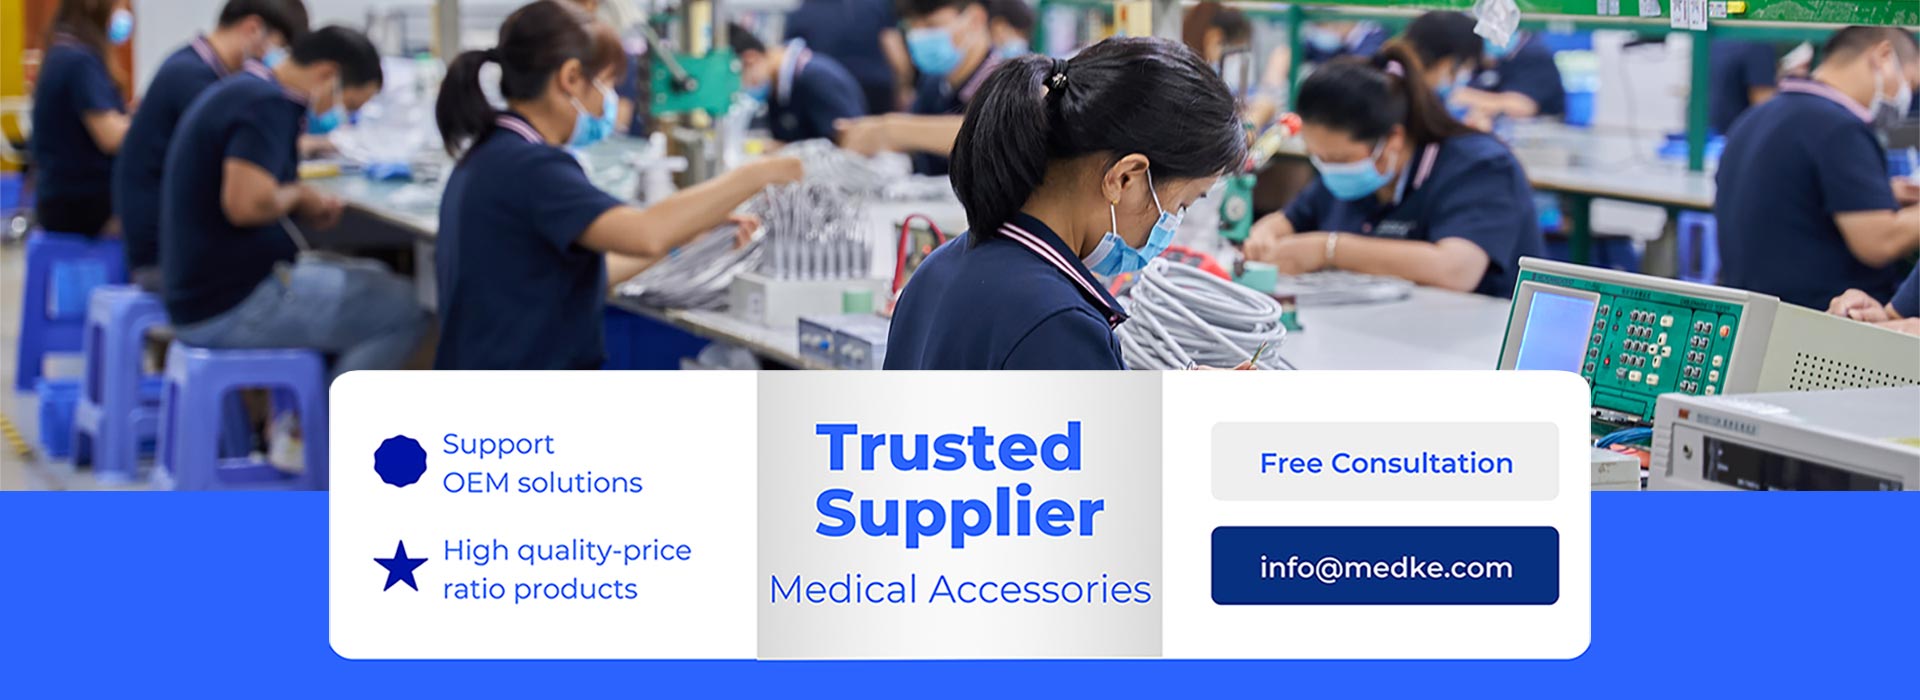 Trusted Supplier-全球搜 banner_1920 × 700